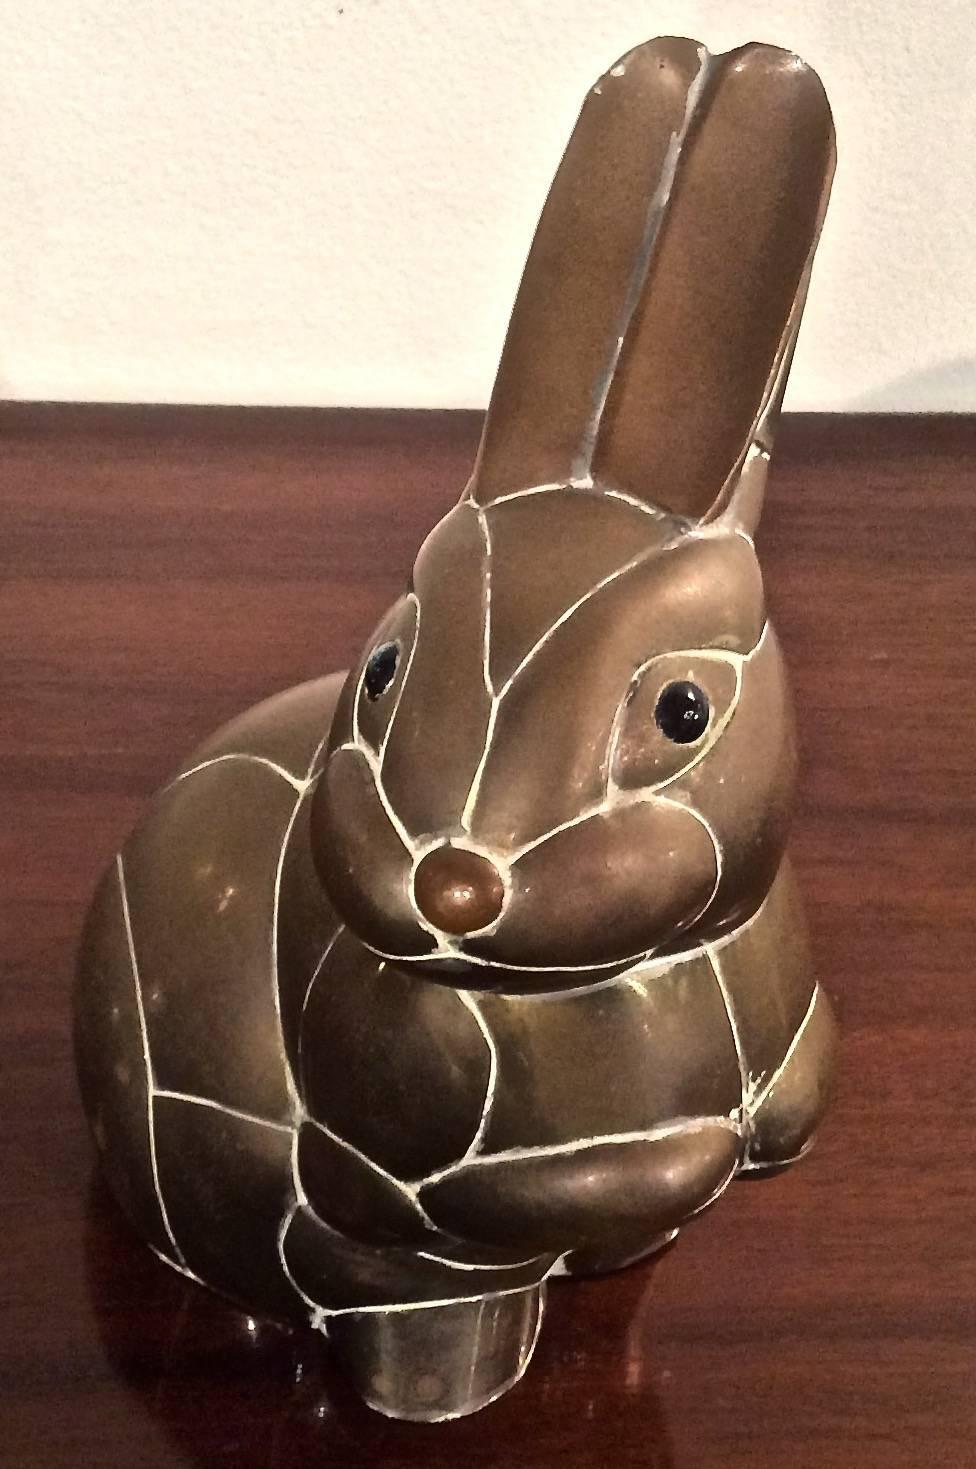 Patinated brass and copper bunny sculpture, attributed/manner of Sergio Bustamante (b.1924-2013), unsigned, circa 1970s. Bustamante's animal sculpture period was whimsical in style and created fantasy-like animal figures.